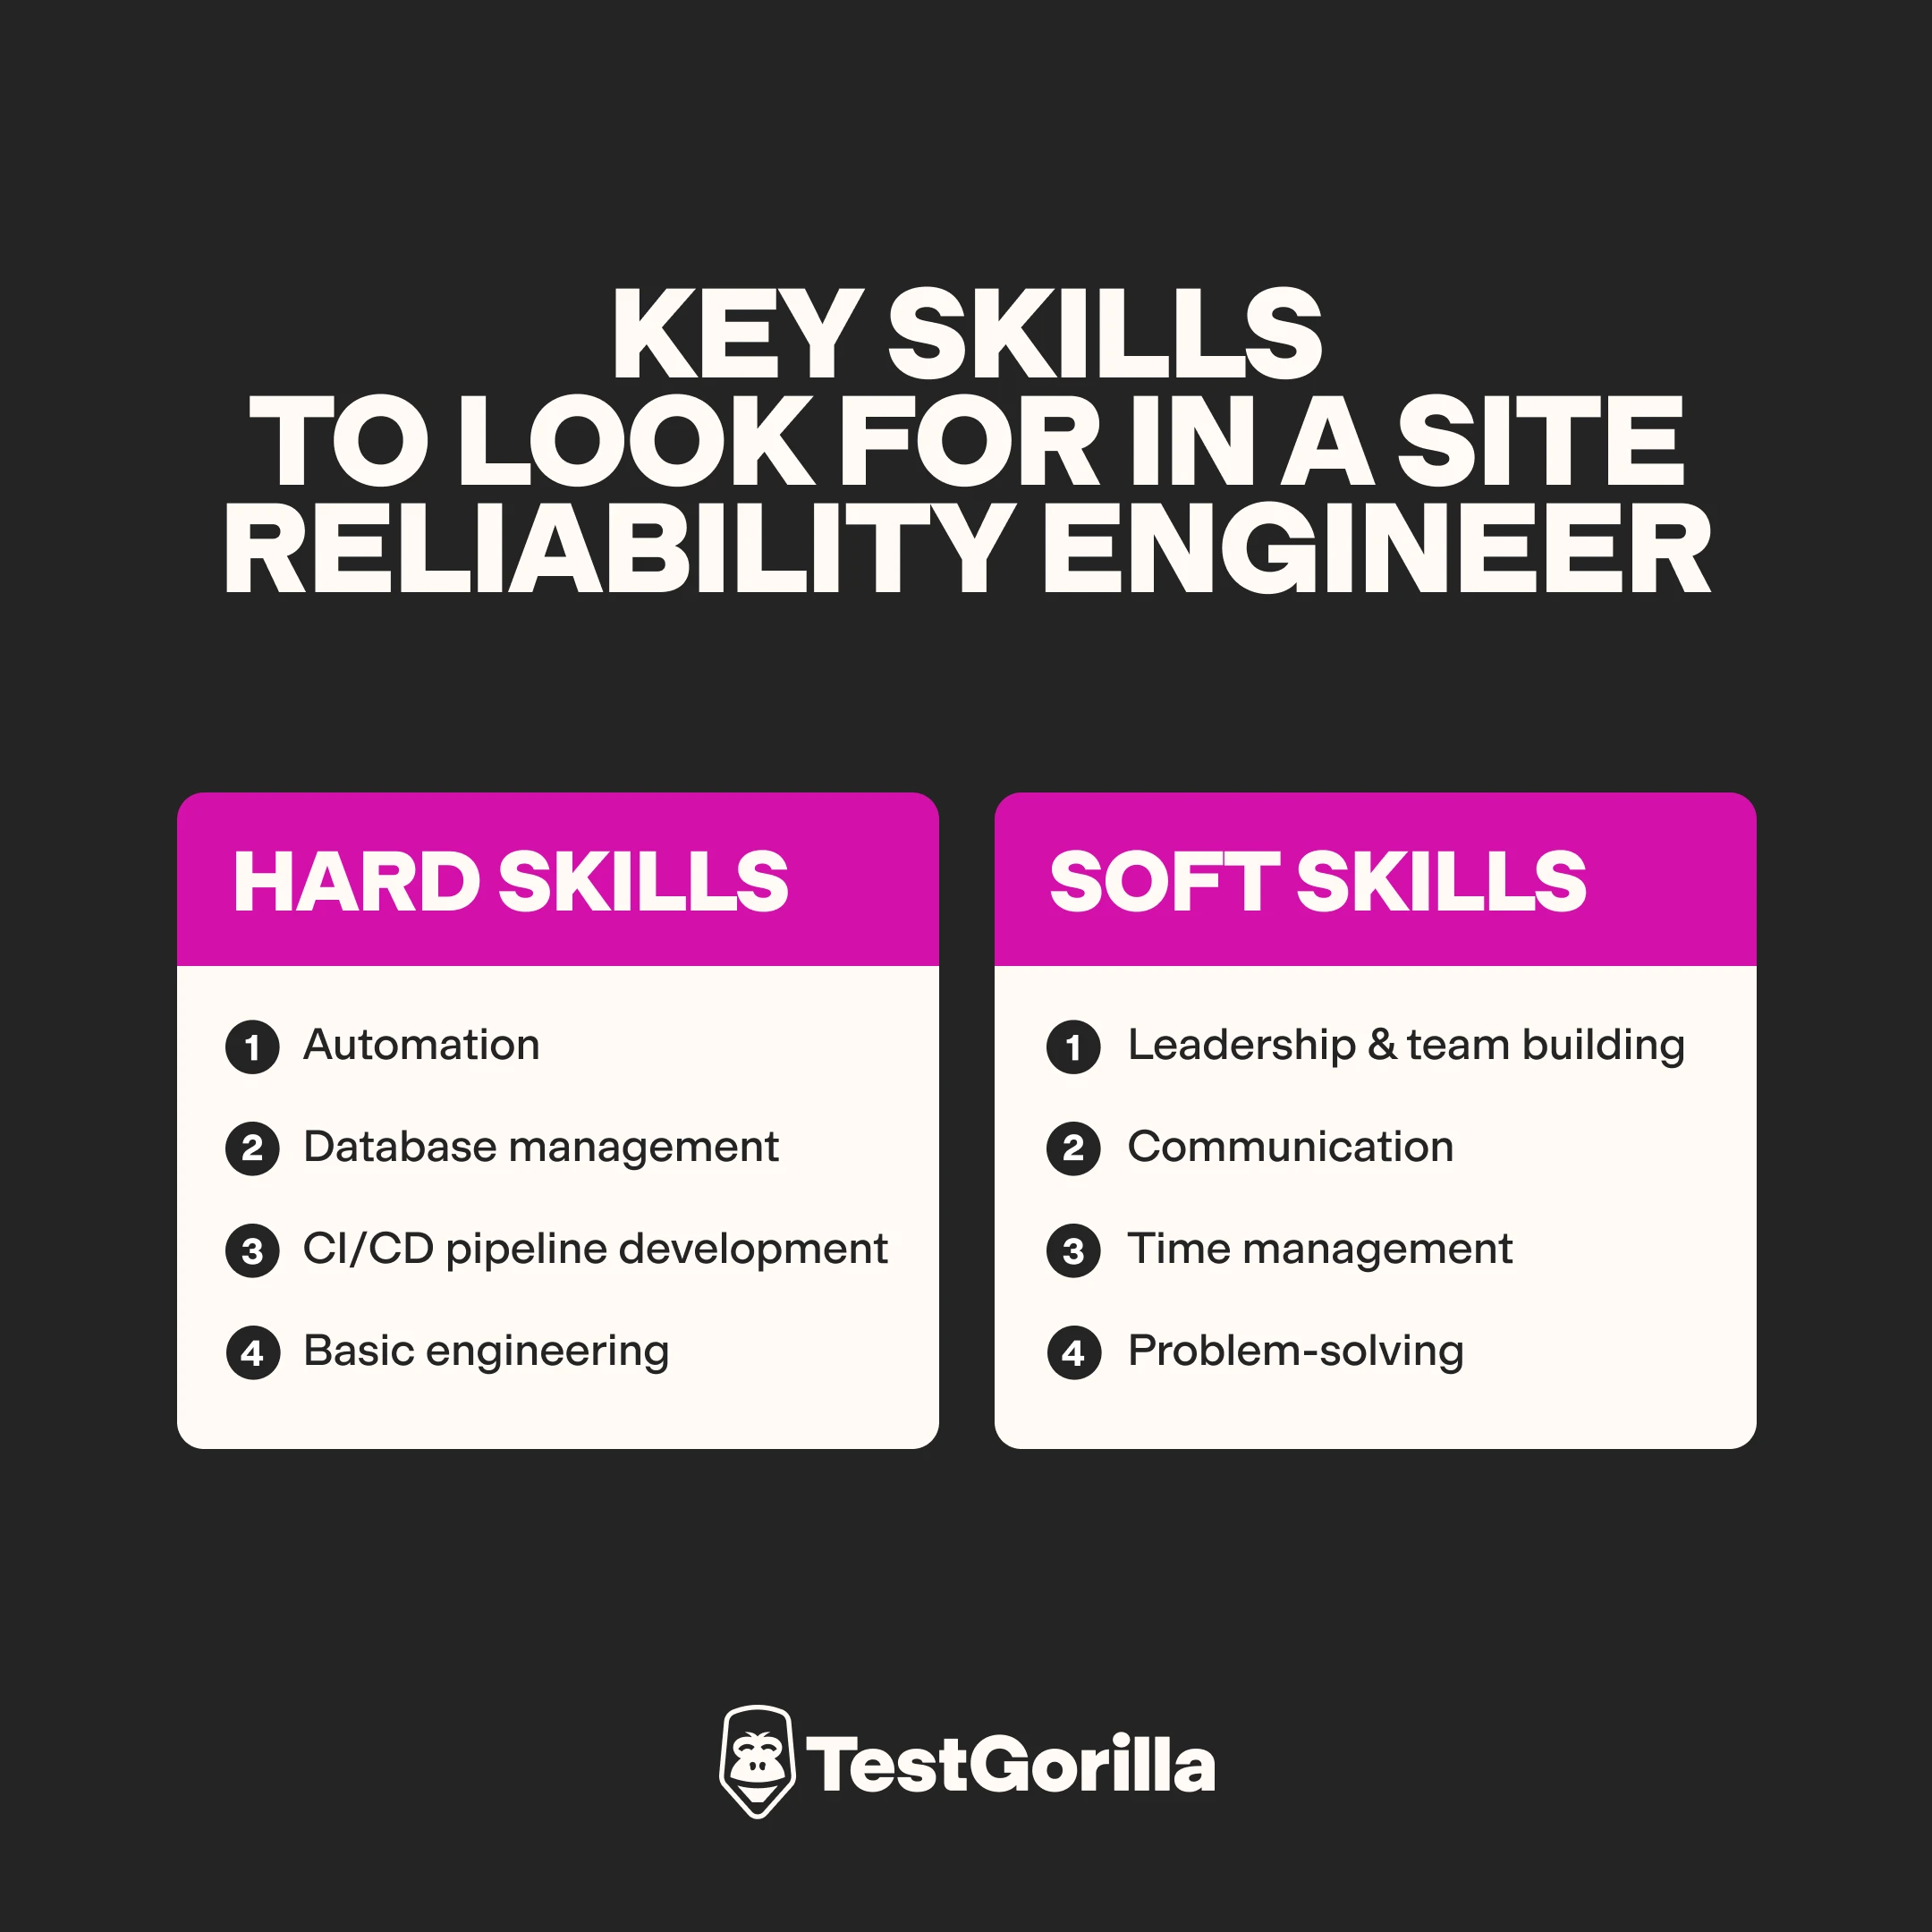 Key skills to look for in a site reliability engineer graphic